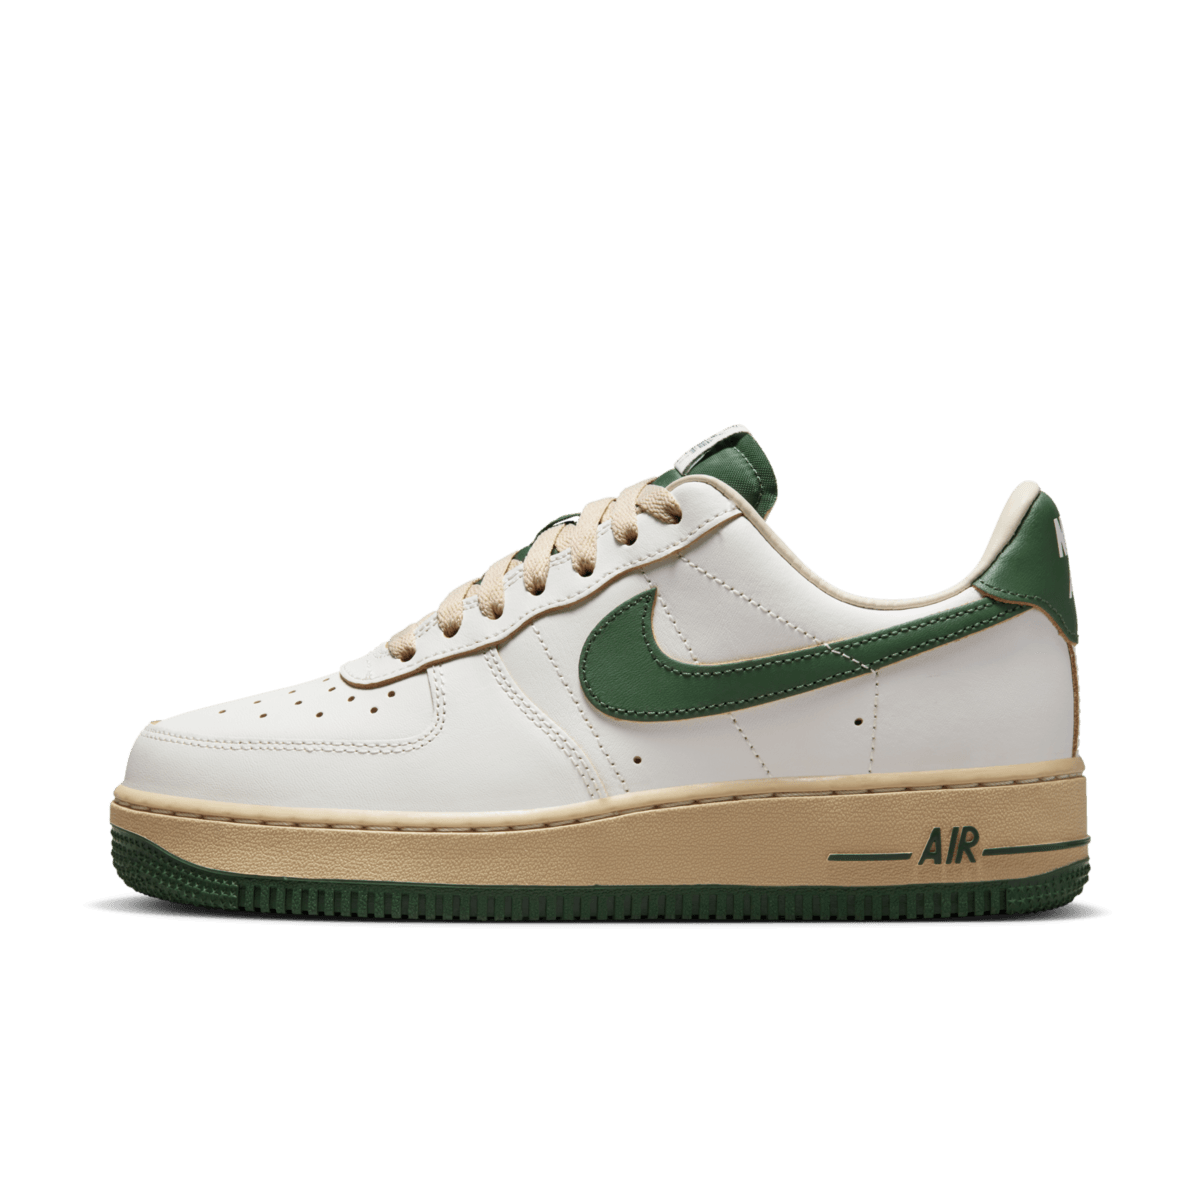 Nike Air Force 1 Low WMNS 'Vintage Gorge Green'